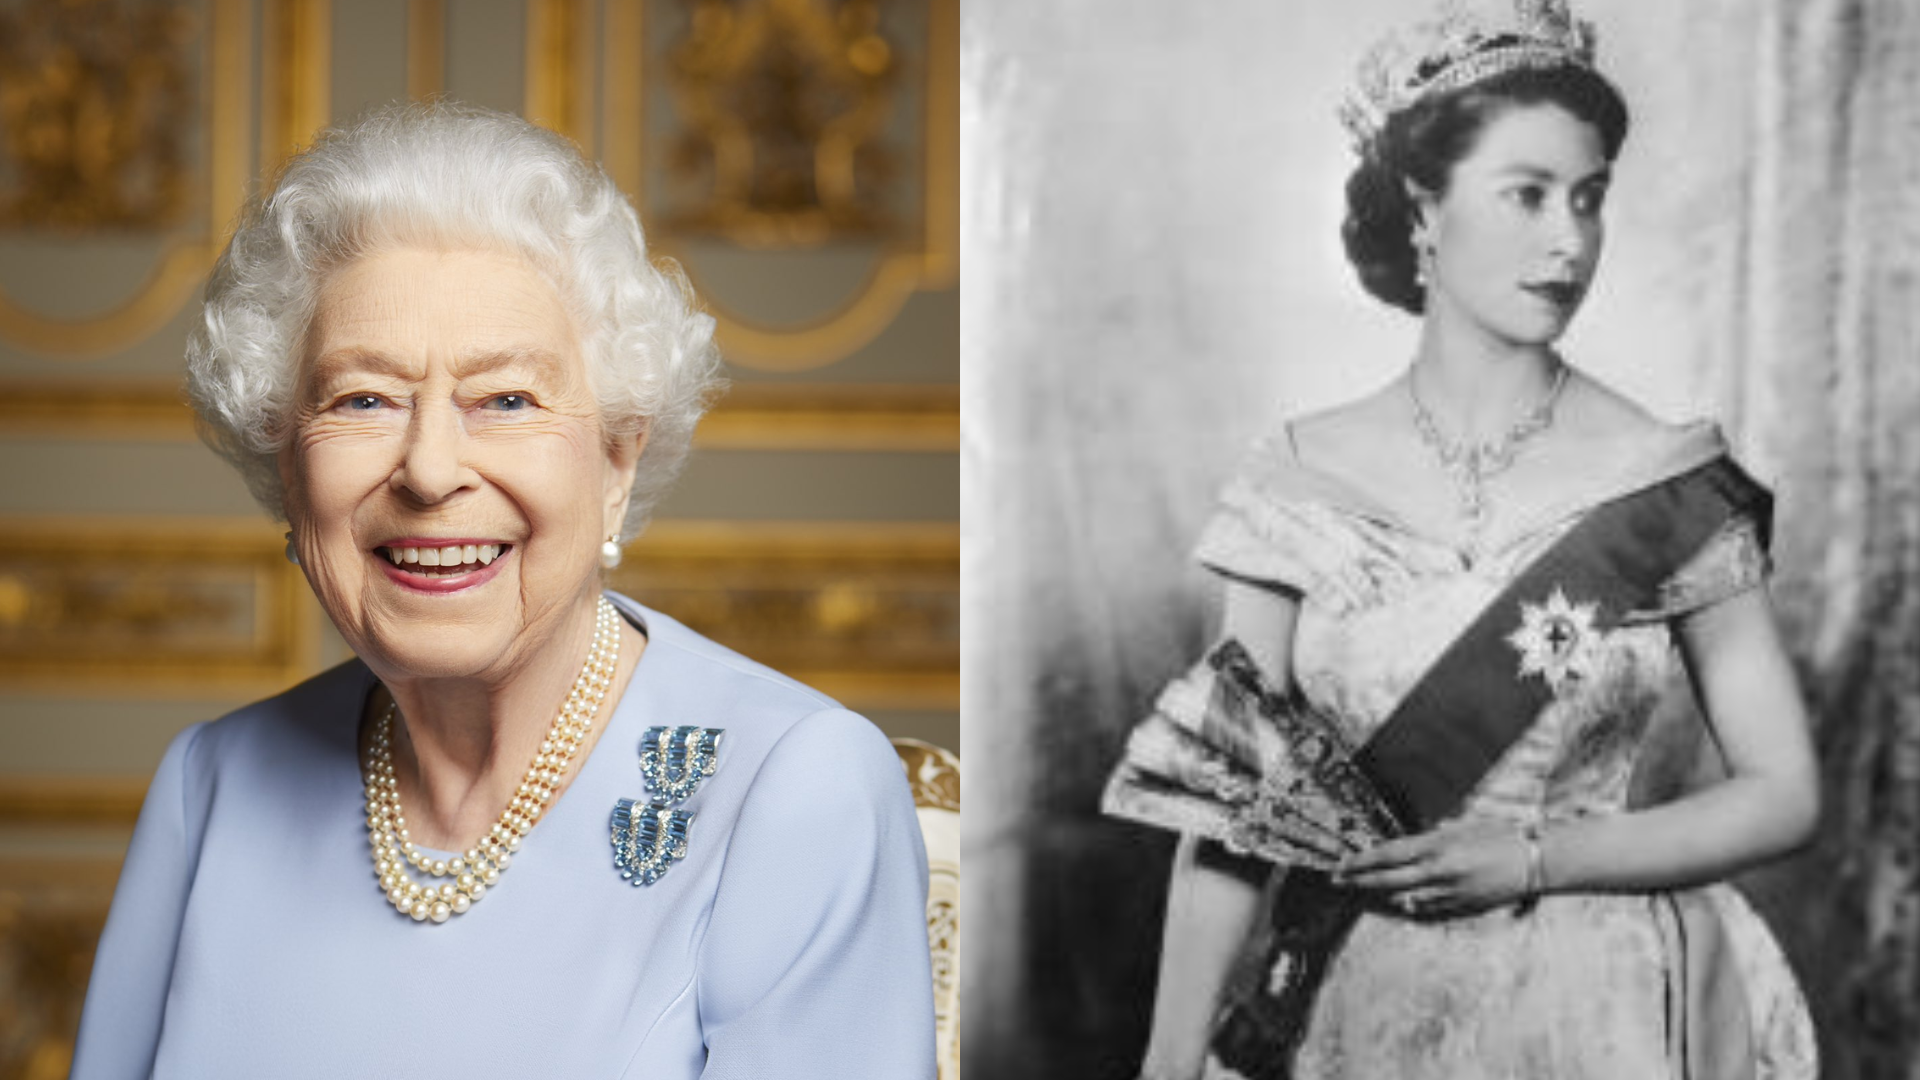 Everything you need to know about Queen Elizabeth II's Funeral Service